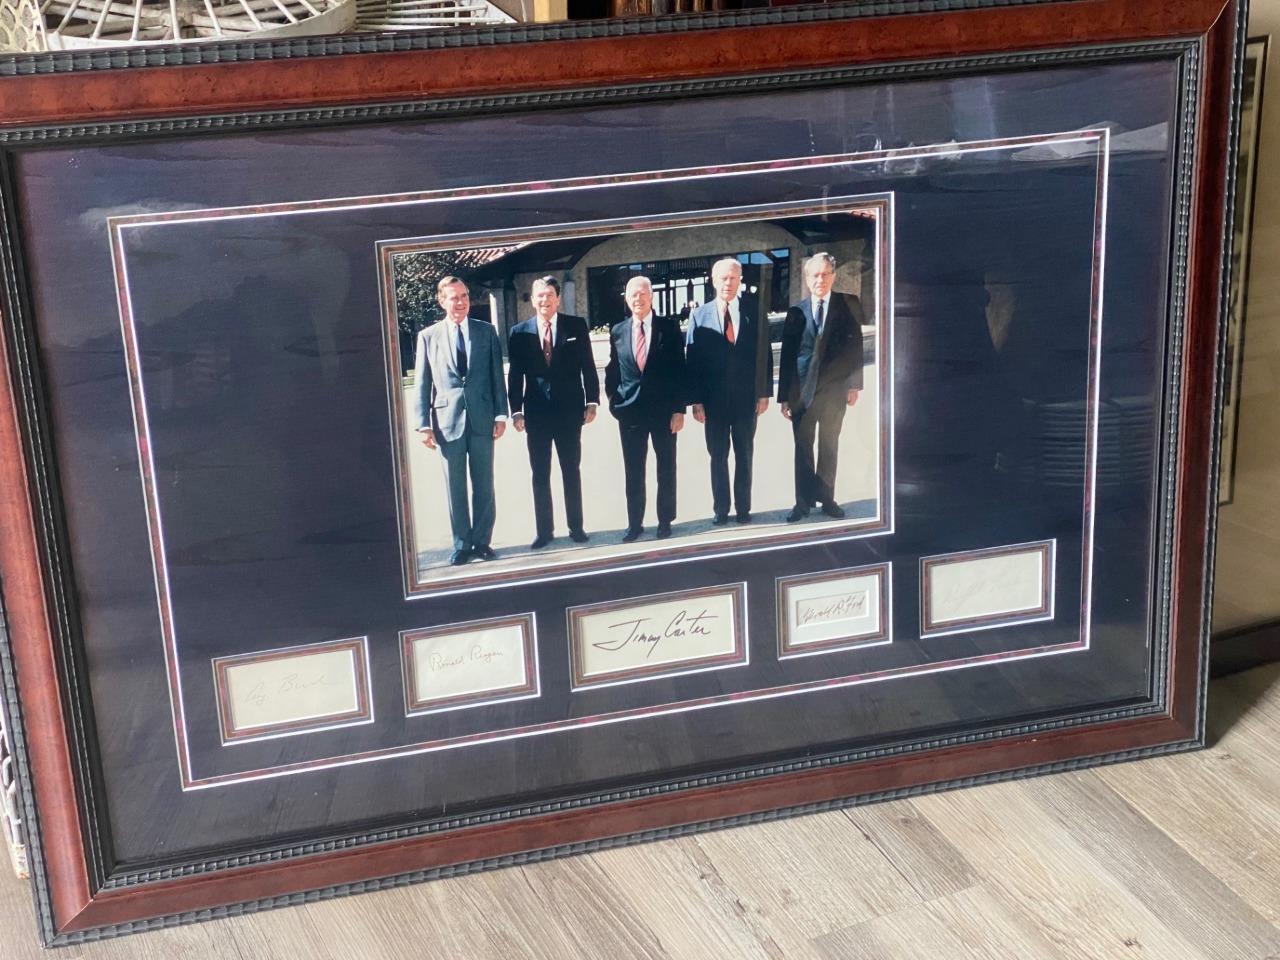 Framed Autographed Photo of Five Former Presidents at Reagan Library Opening Day